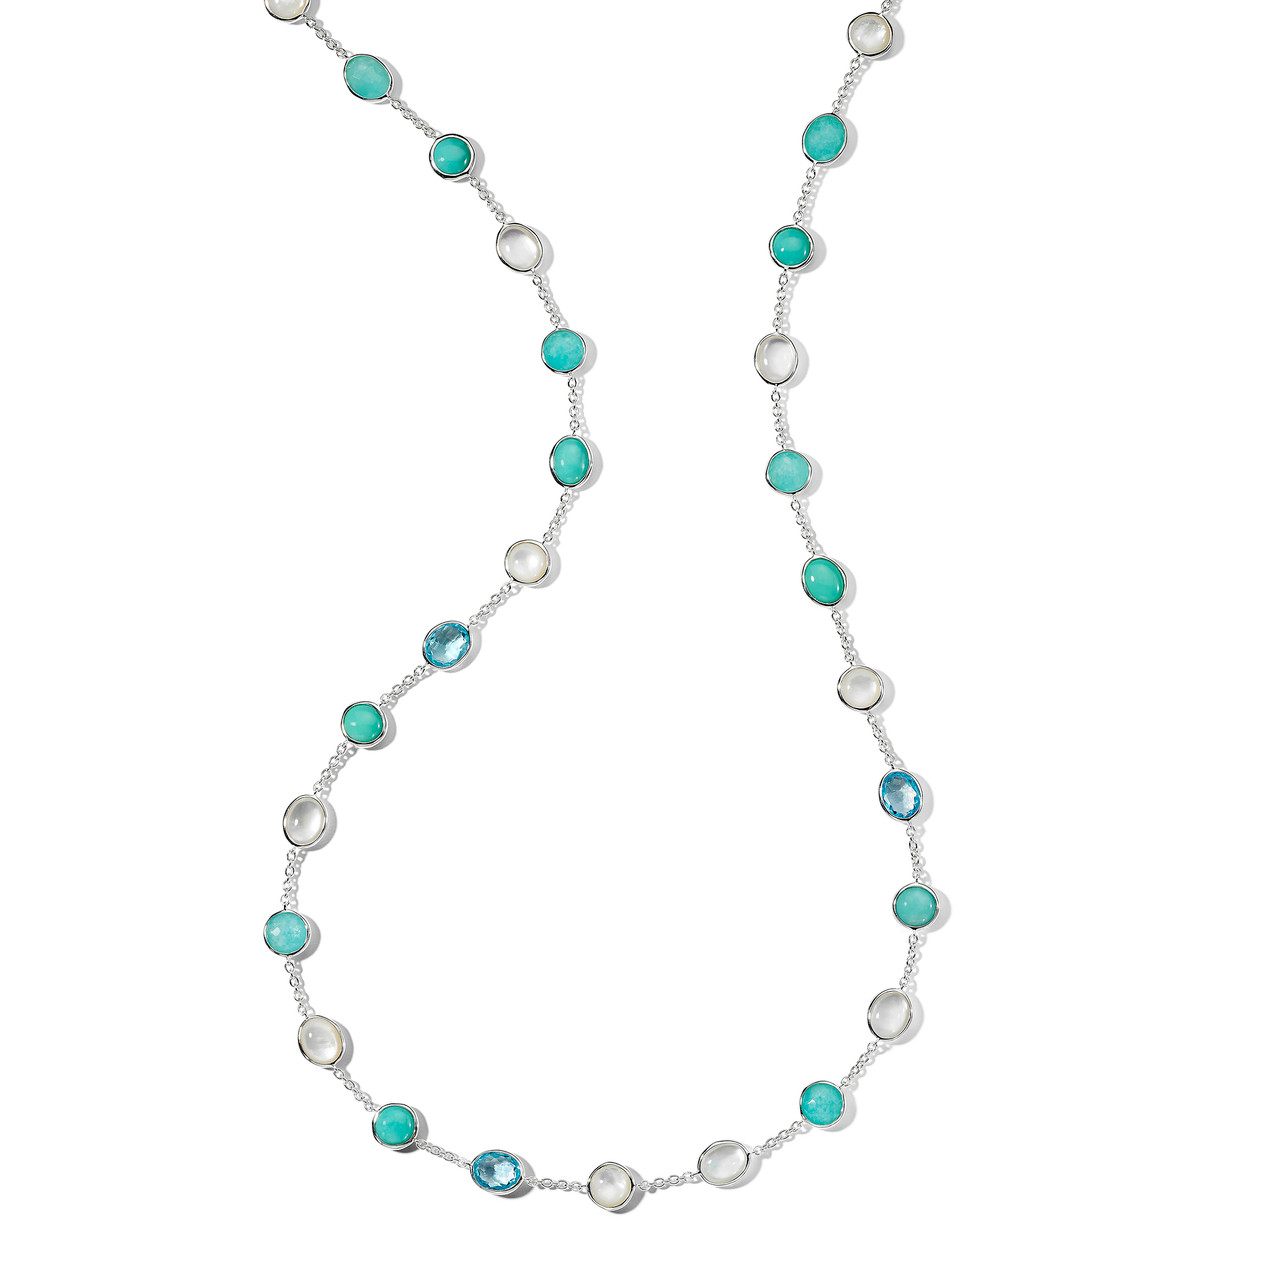 Long Stone Chain Necklace in Sterling Silver SN1824CASCATA - IPPOLITA